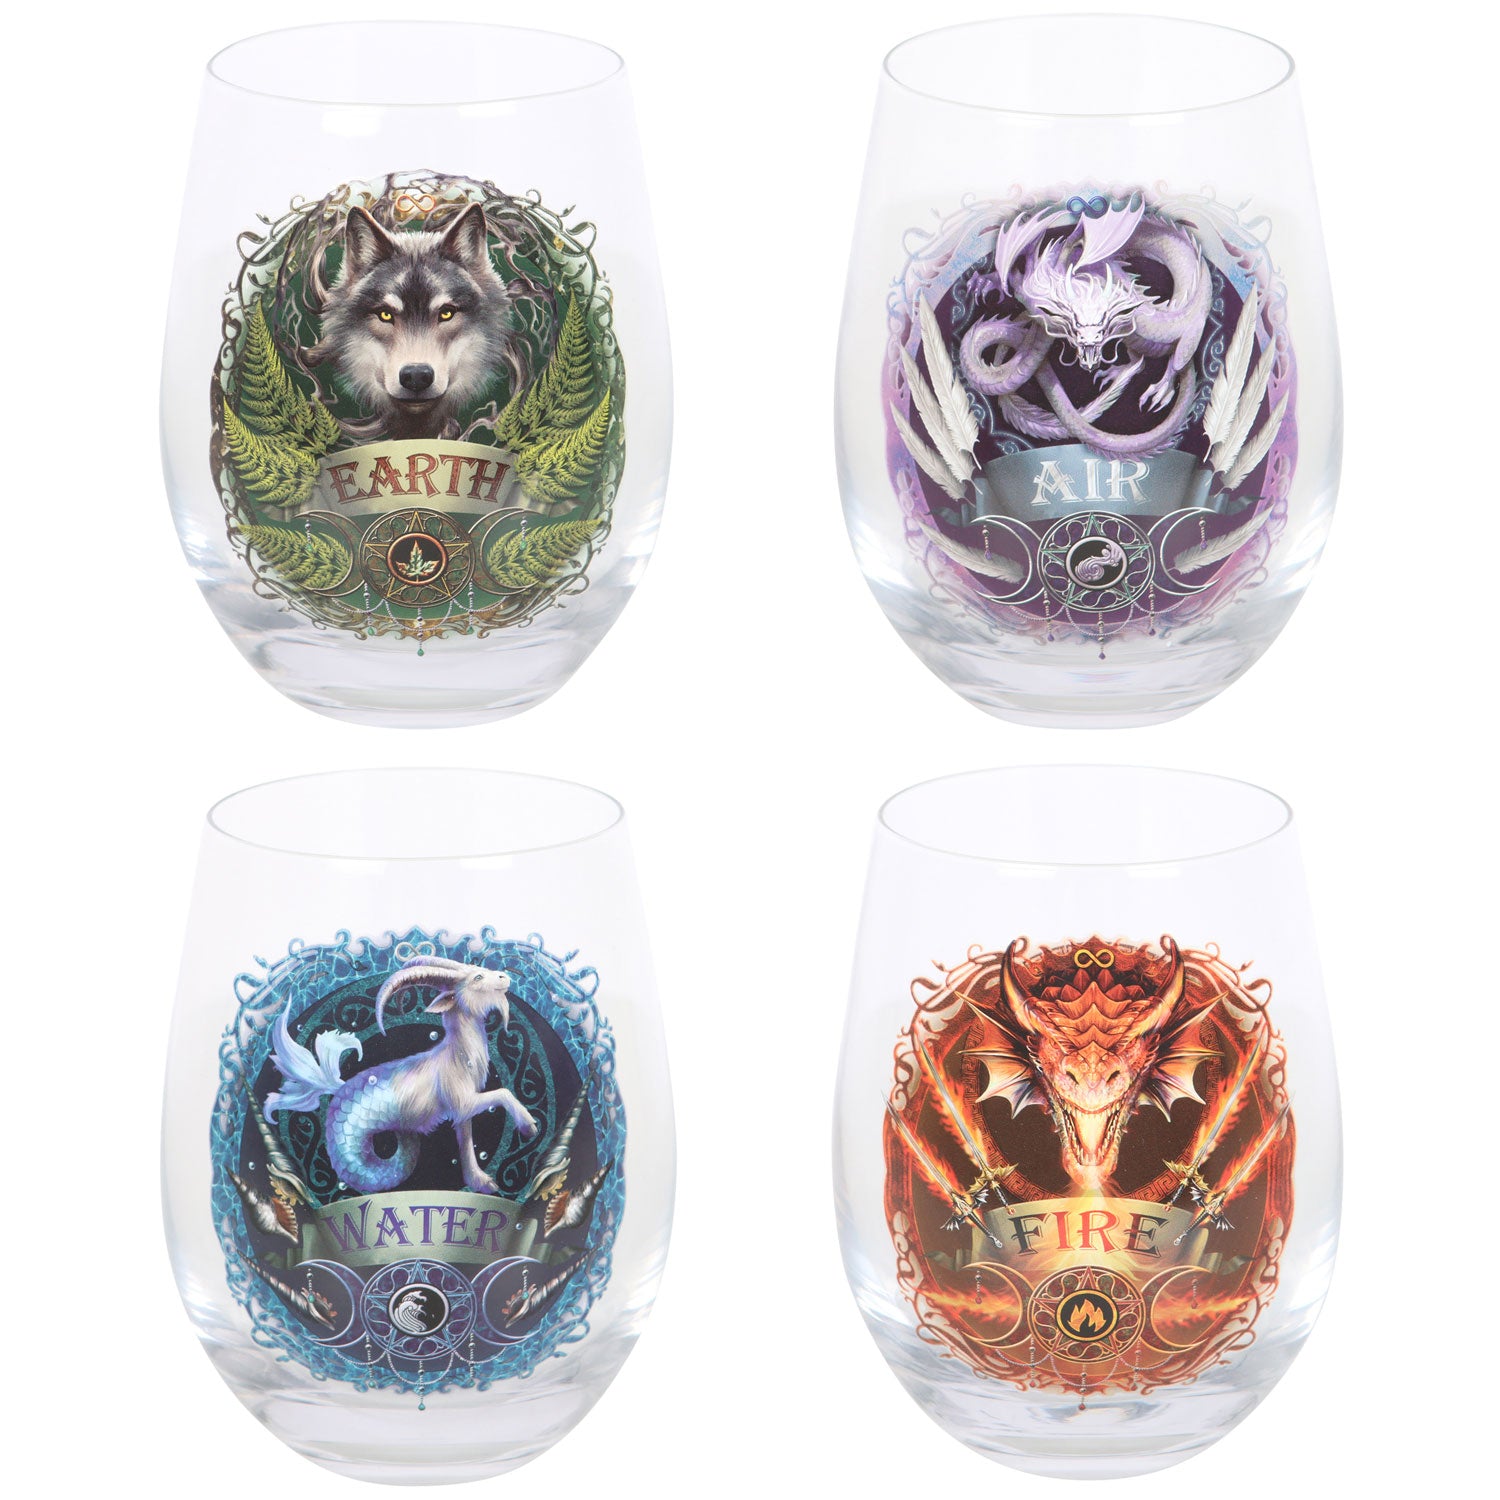 View Set of 4 Elemental Stemless Wine Glasses by Anne Stokes information